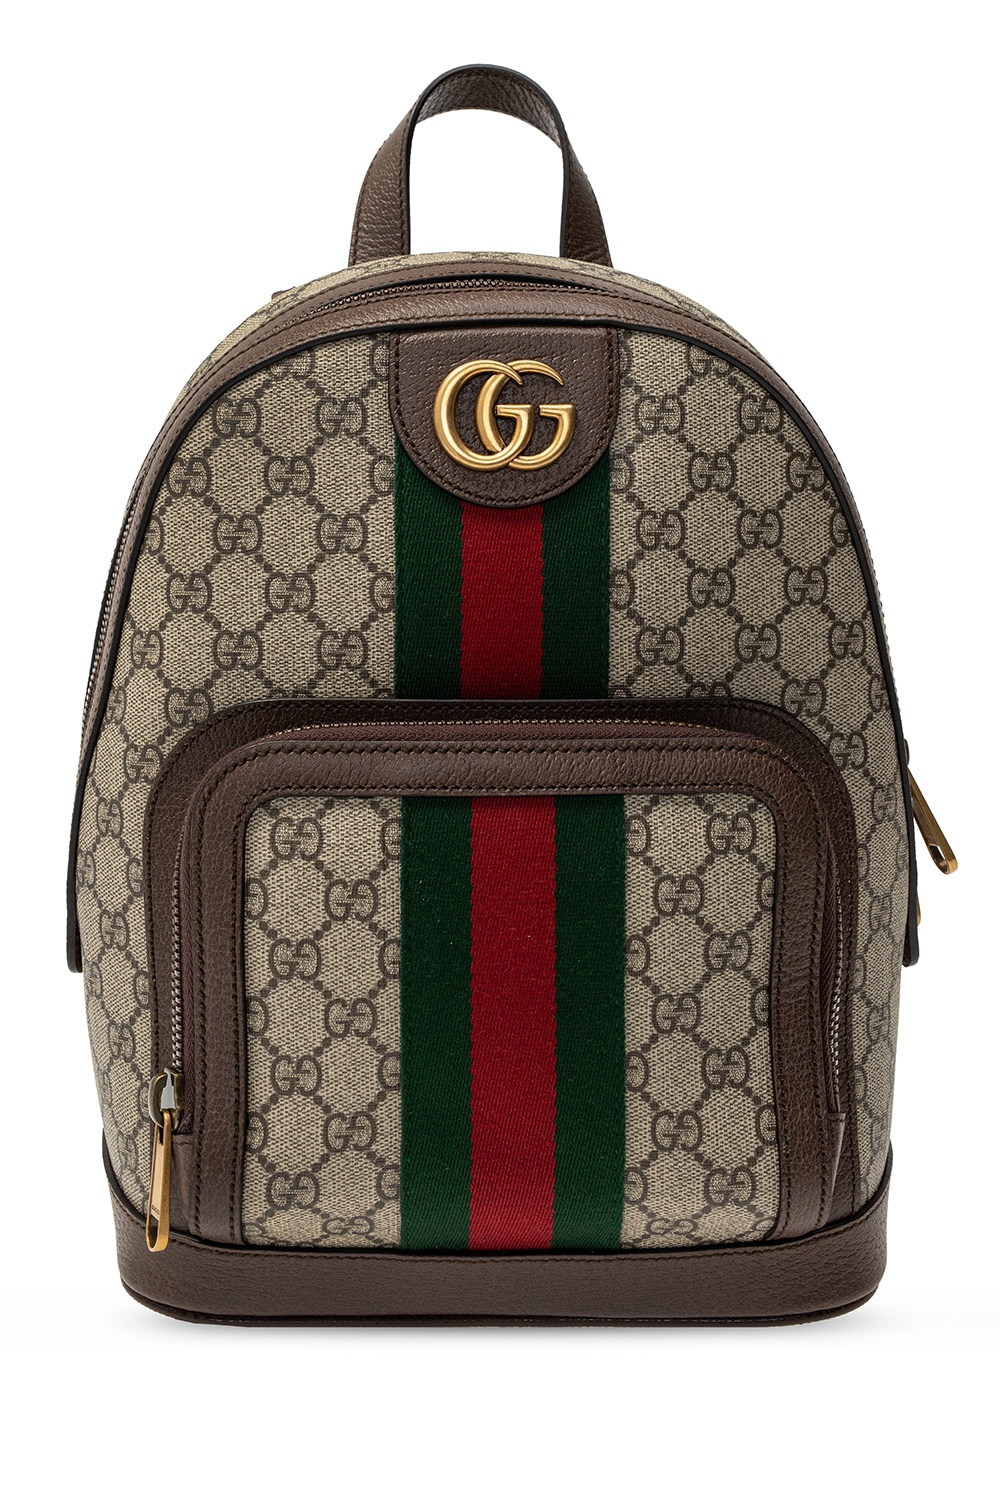 BALO GUCCI OPHIDIA GG SMALL BACKPACK 13